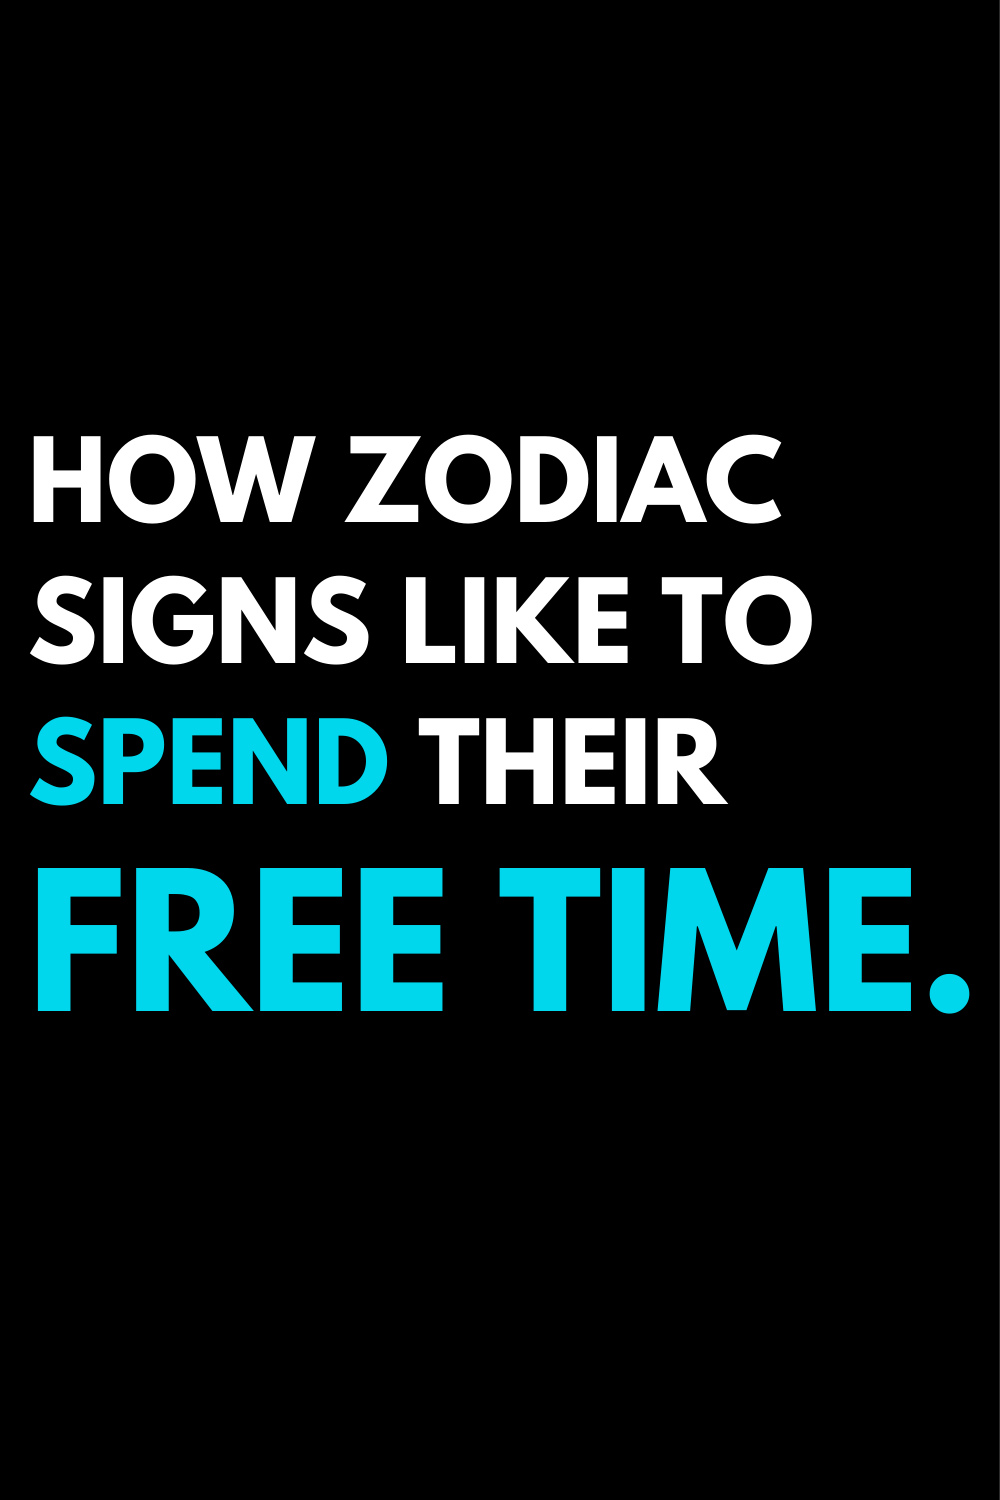 How zodiac signs like to spend their free time.